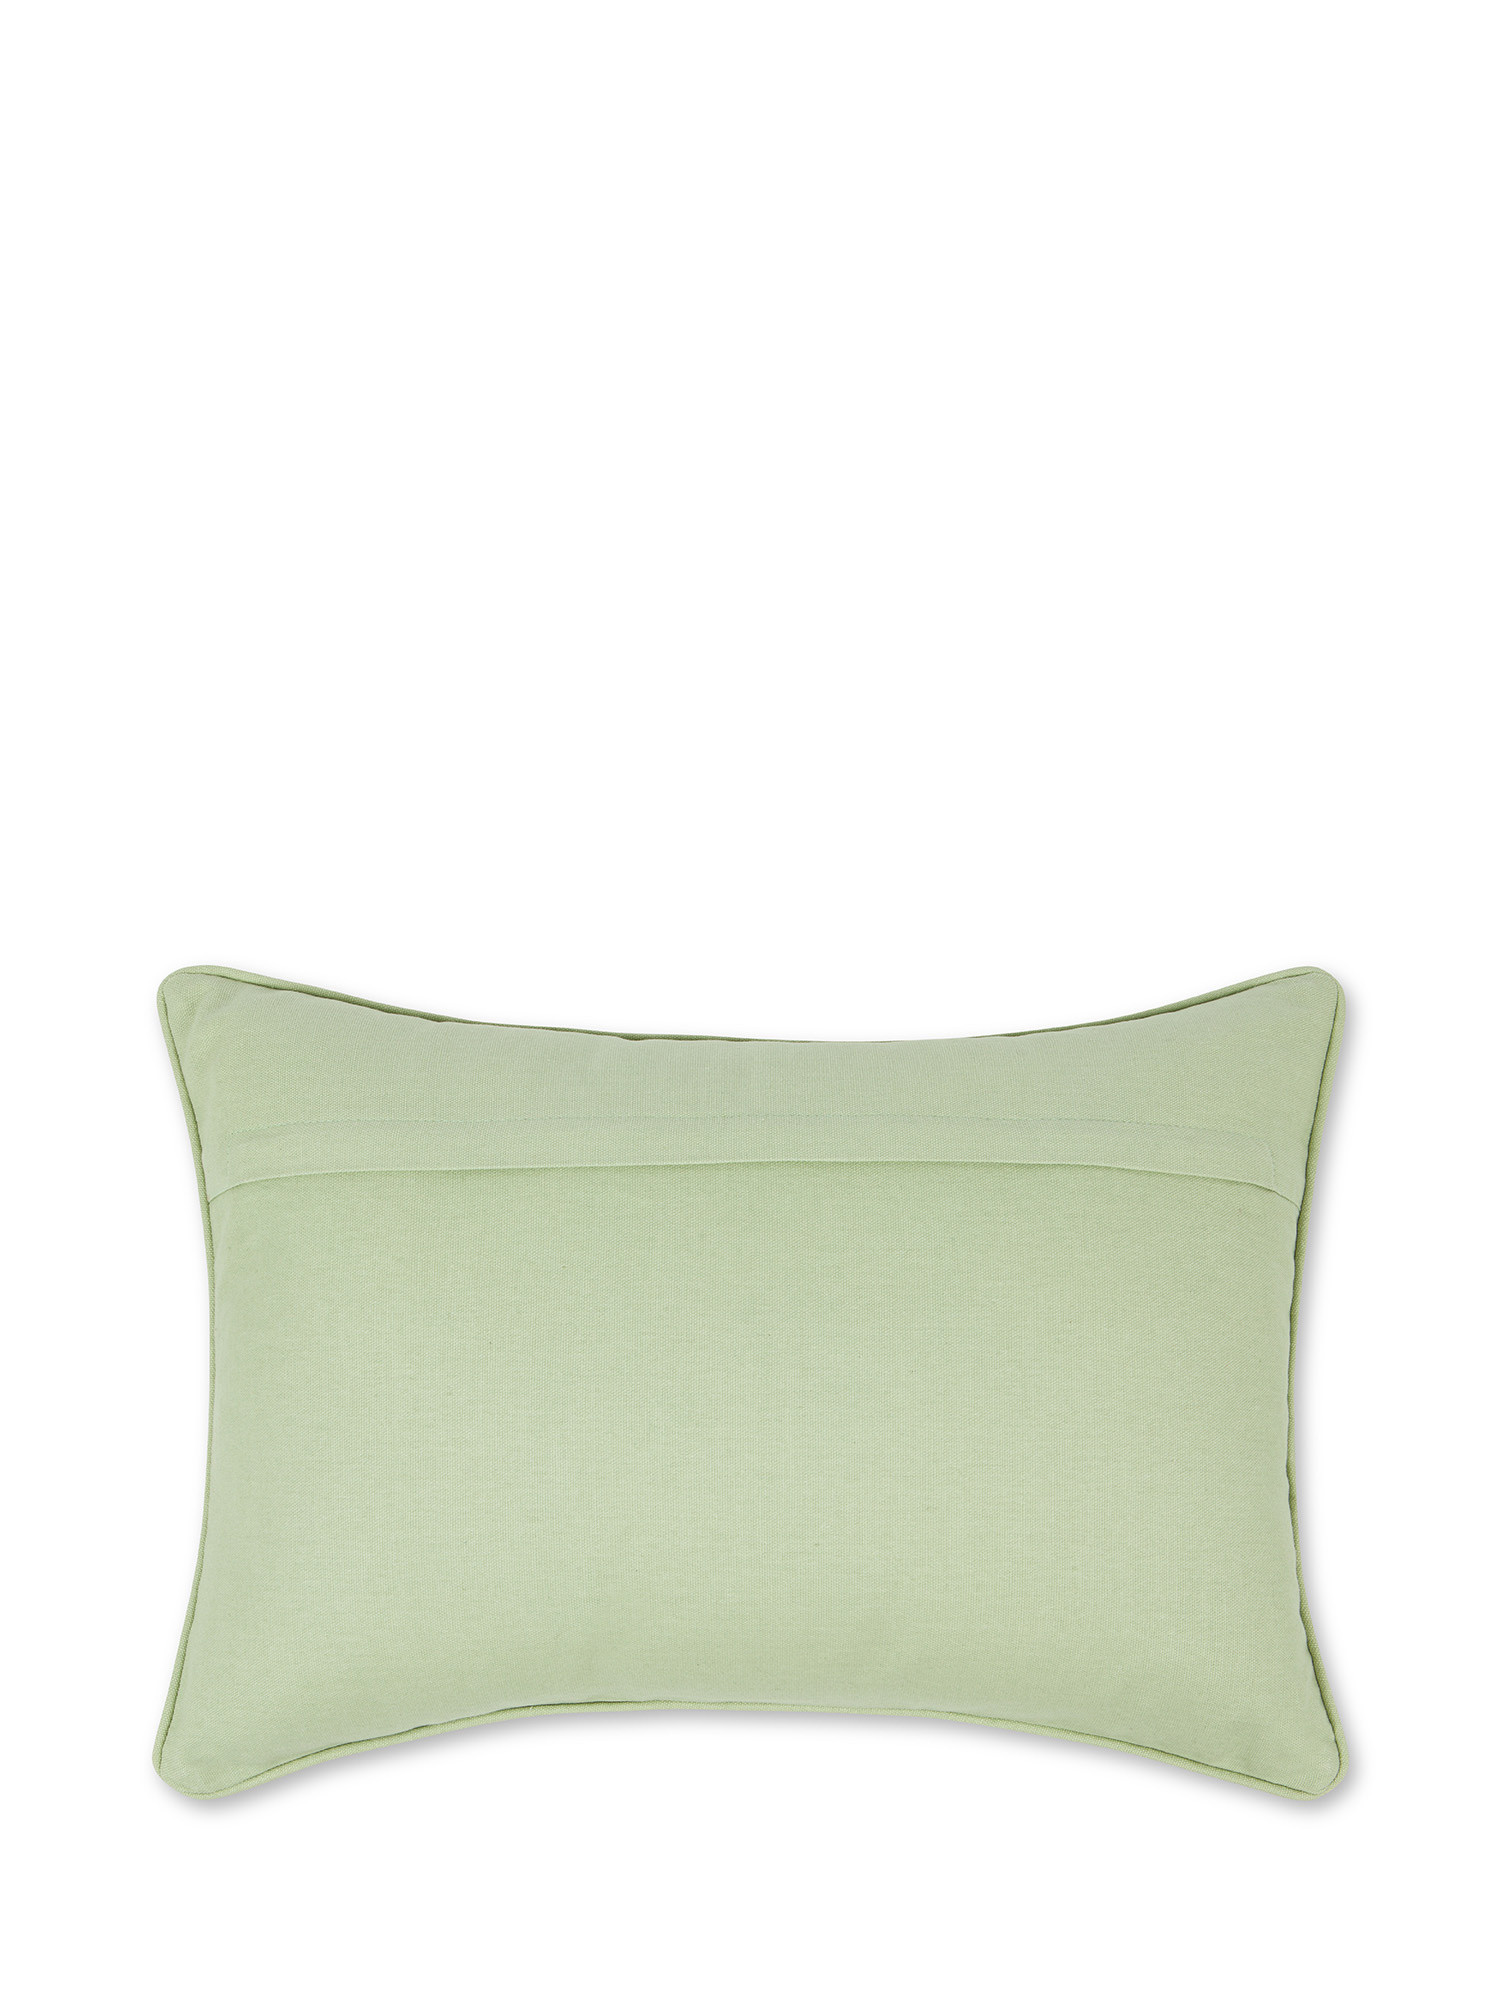 Flower embroidered cushion 35X50cm, Green, large image number 1